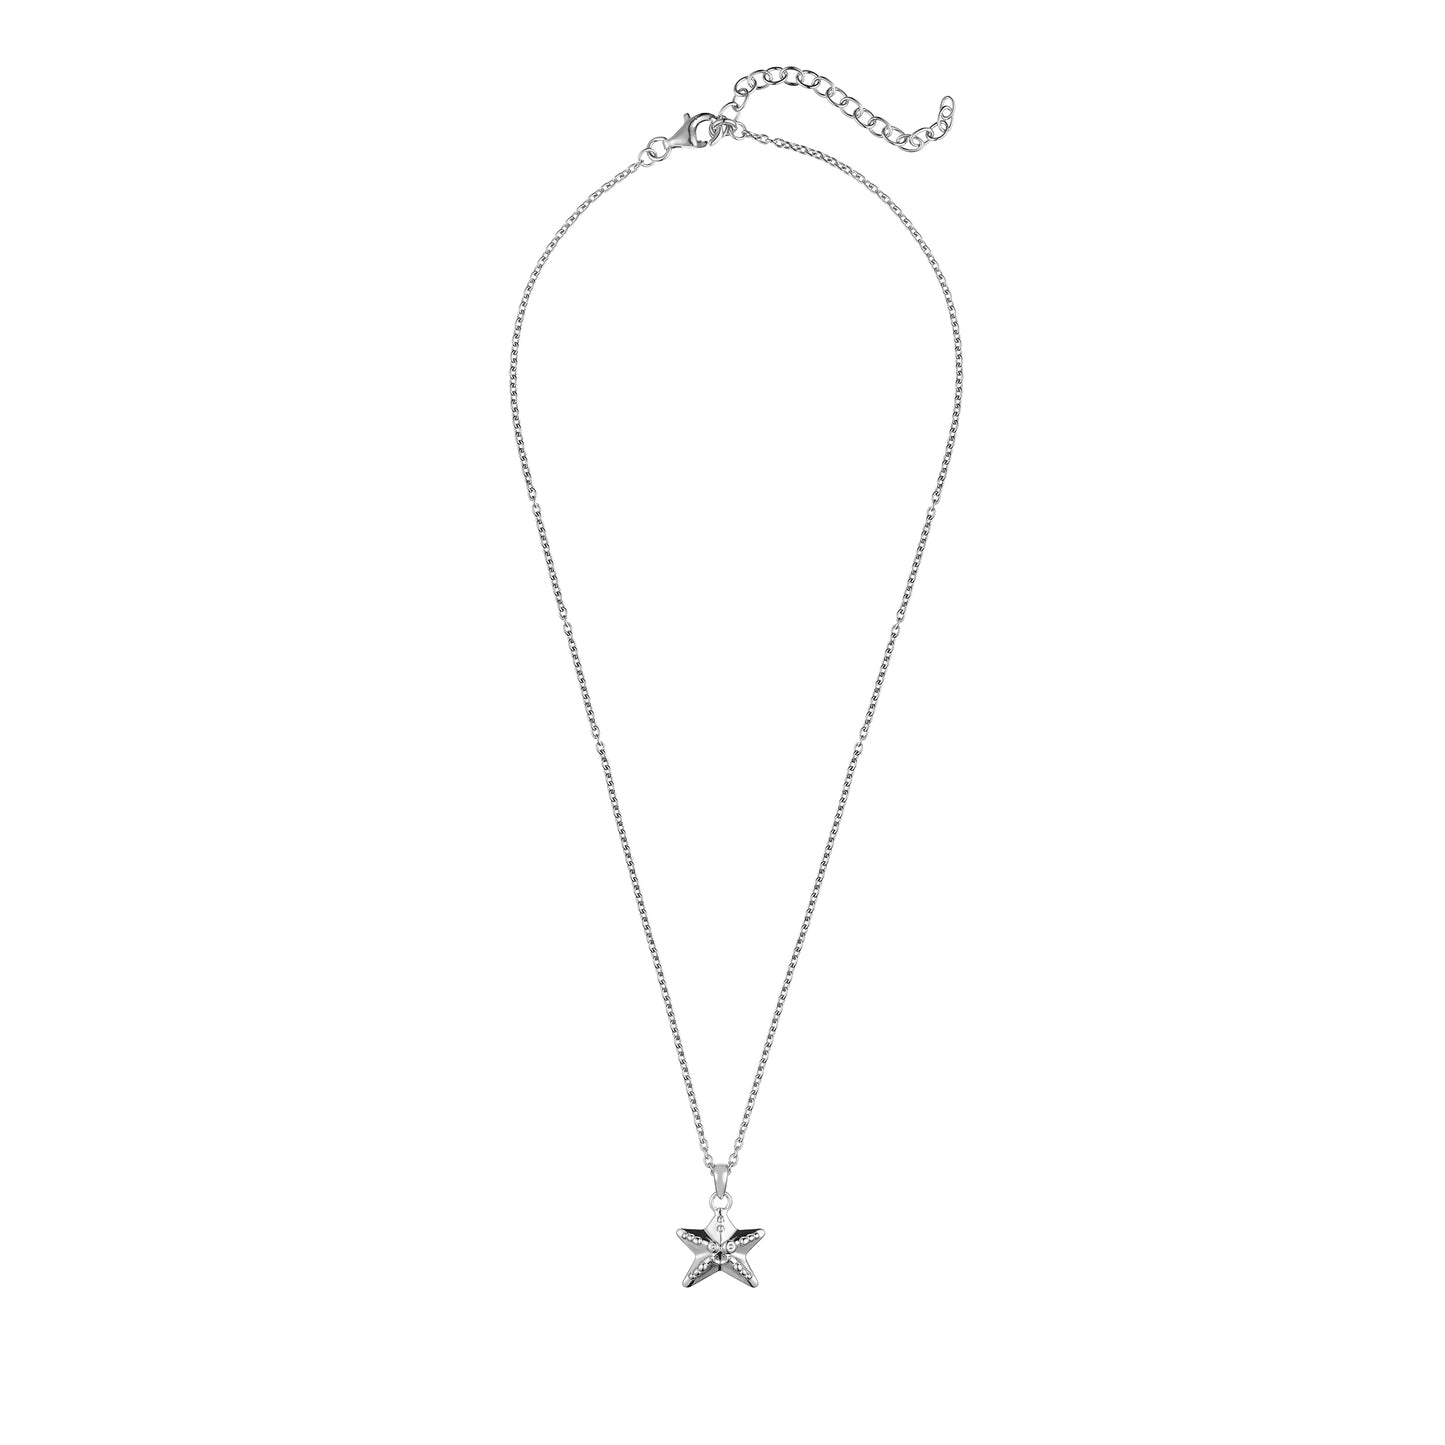 Children's Silver Starfish with Smile Pendant on an Extendable Chain Necklace